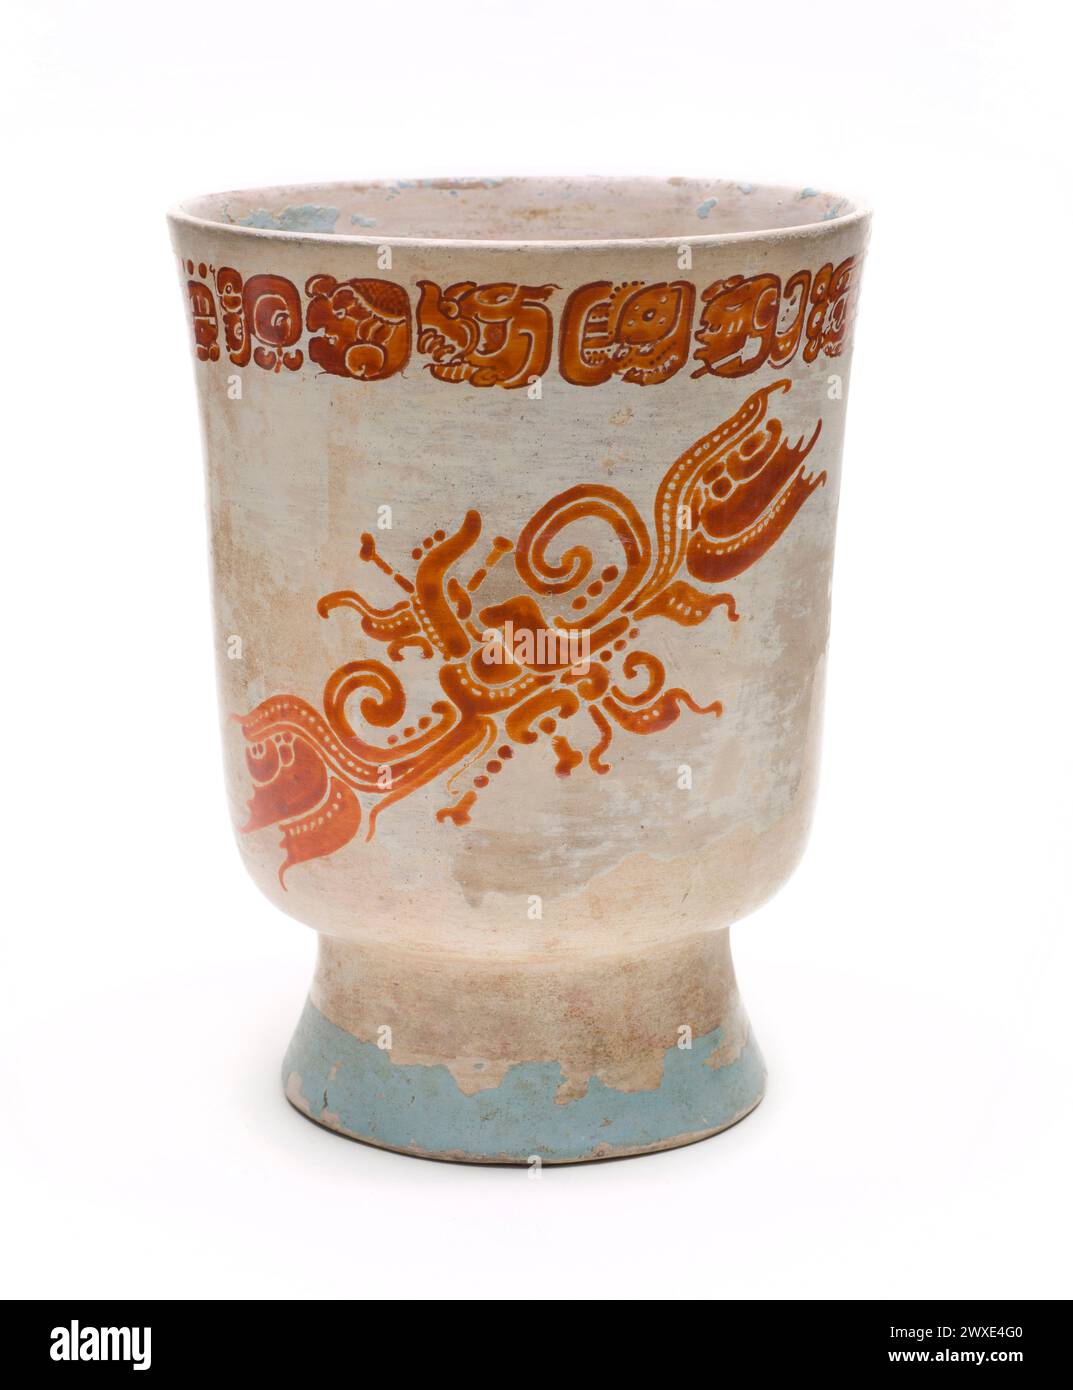 Polychrome Cylinder Vessel with Pedestal Base Guatemala or Mexico, Northern Peten or Southern Campeche, possibly Los Alacranes, Maya, 650-800 CE. Slip-painted ceramic with post-fire stucco and pigment. 16.8cm high. Stock Photo